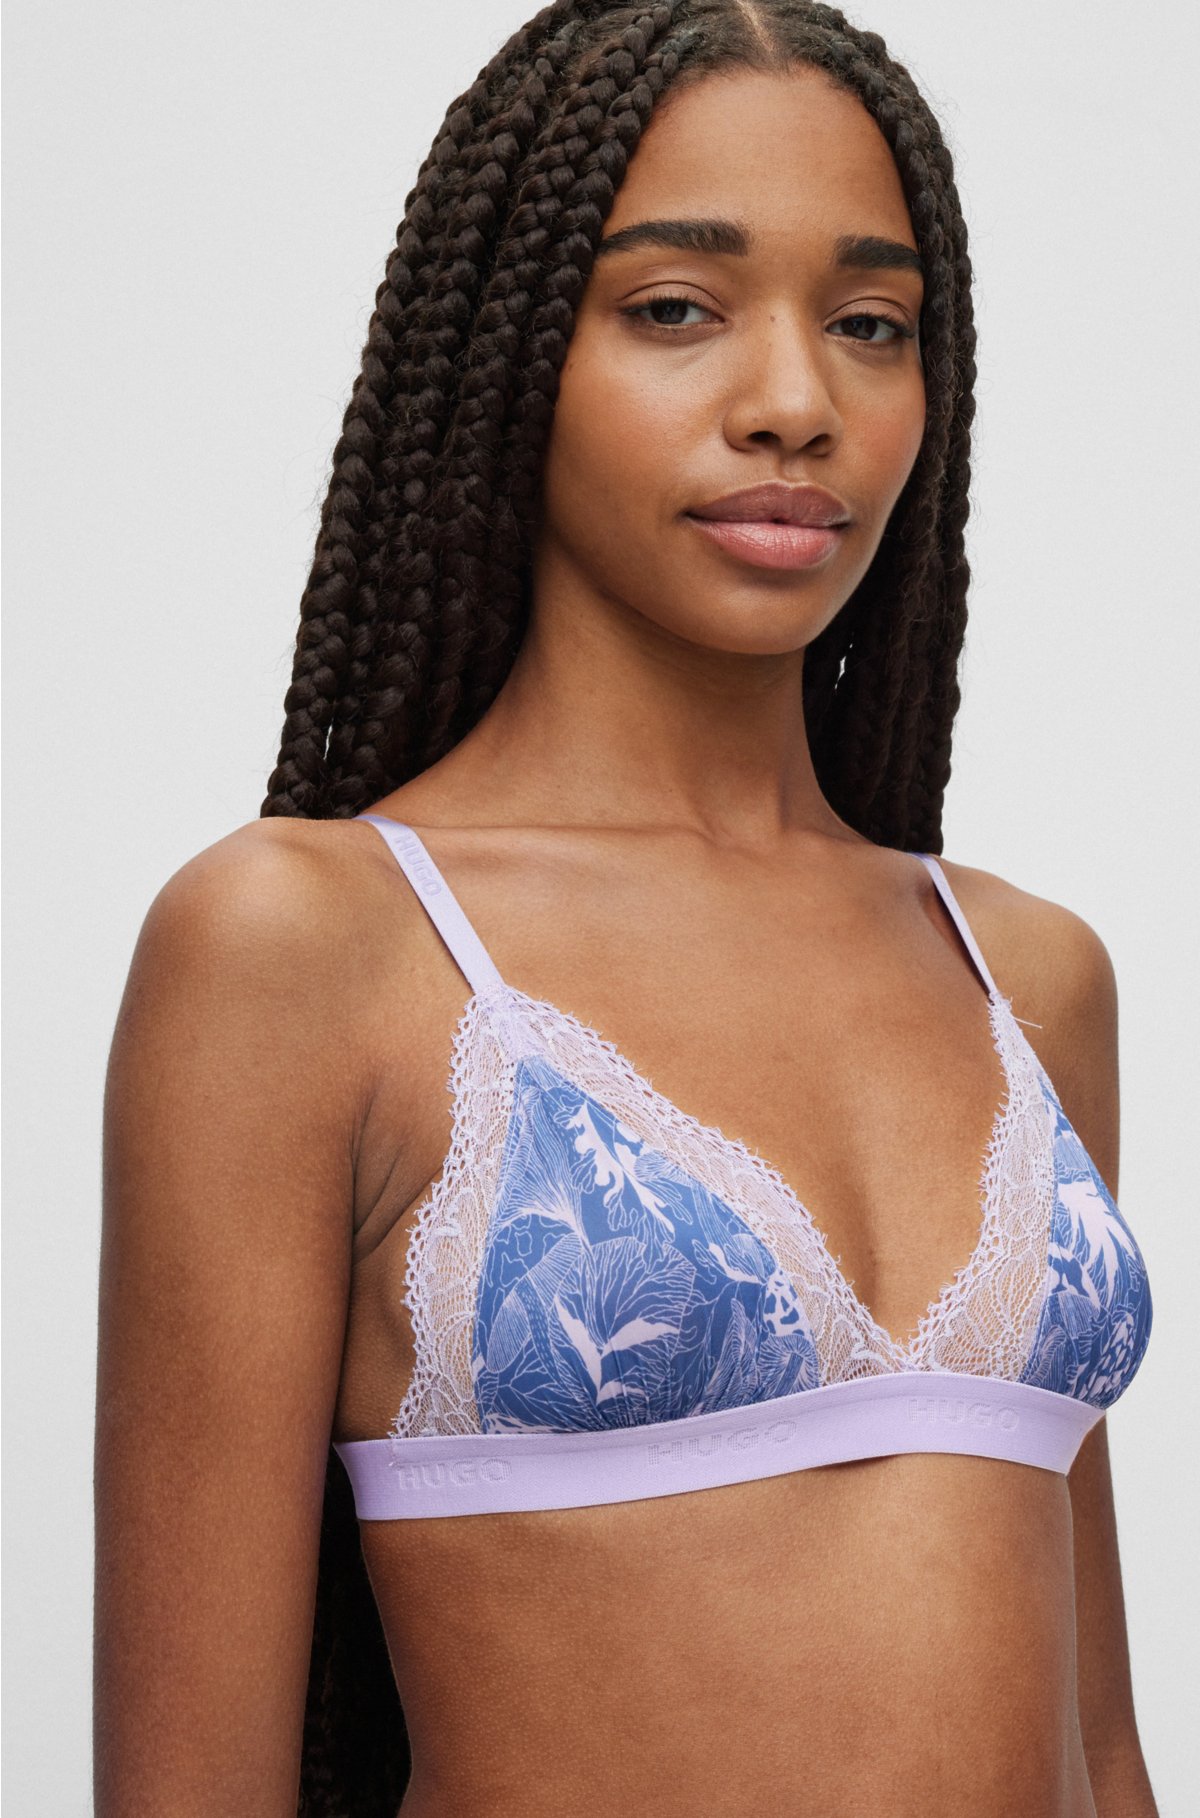 Bras, Lace, Triangle, Sheer + More